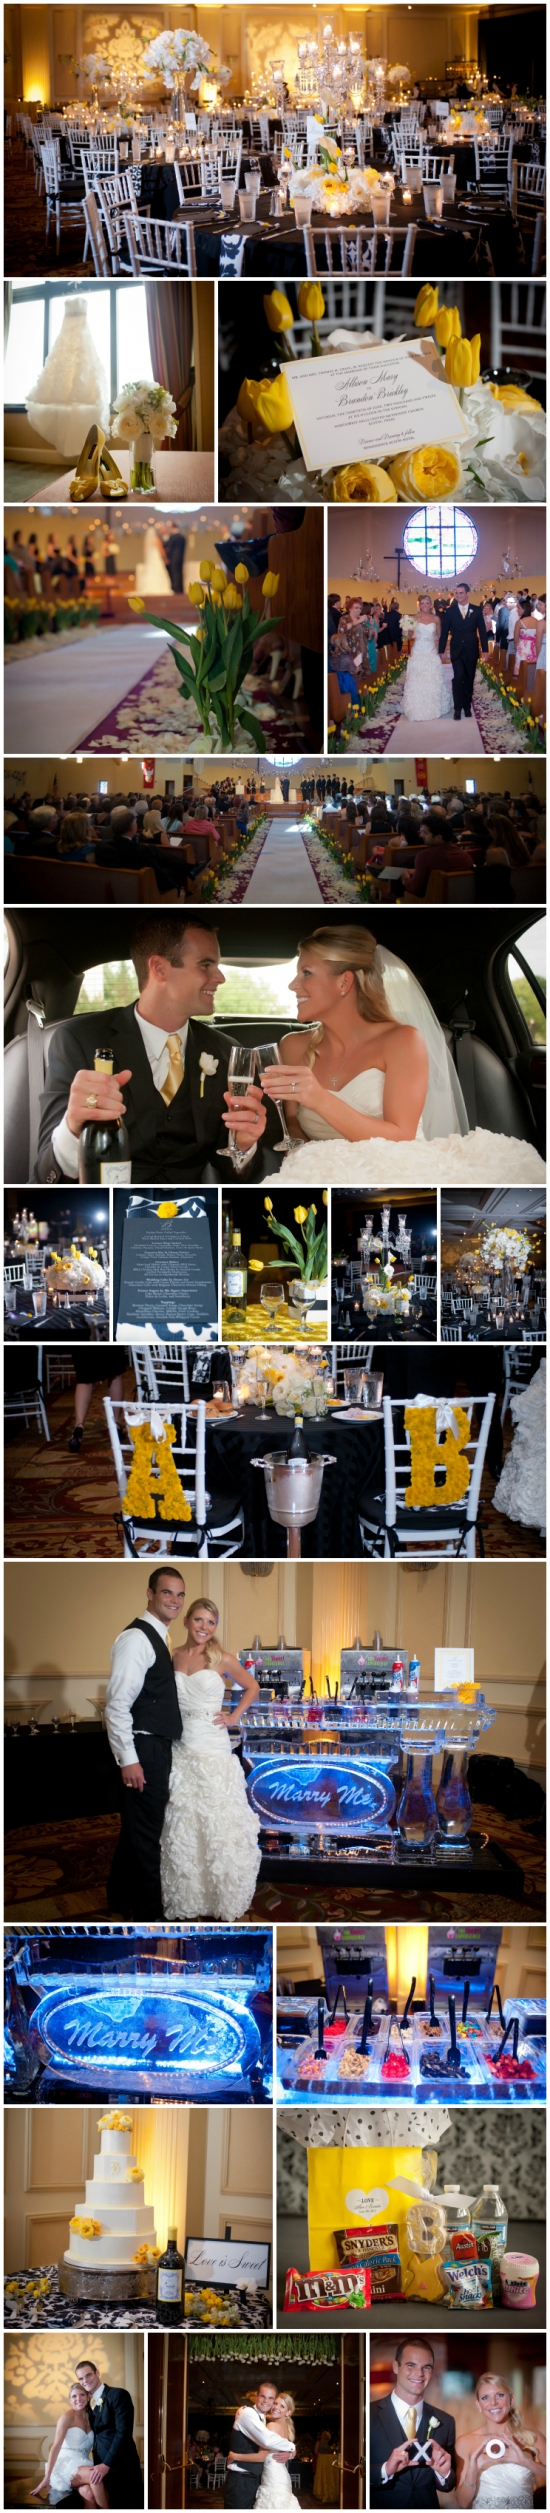 Alli + Brandon's Yellow Real Wedding with FroYo ice bar by Your Very Own Fairy Godmother in Austin, TX